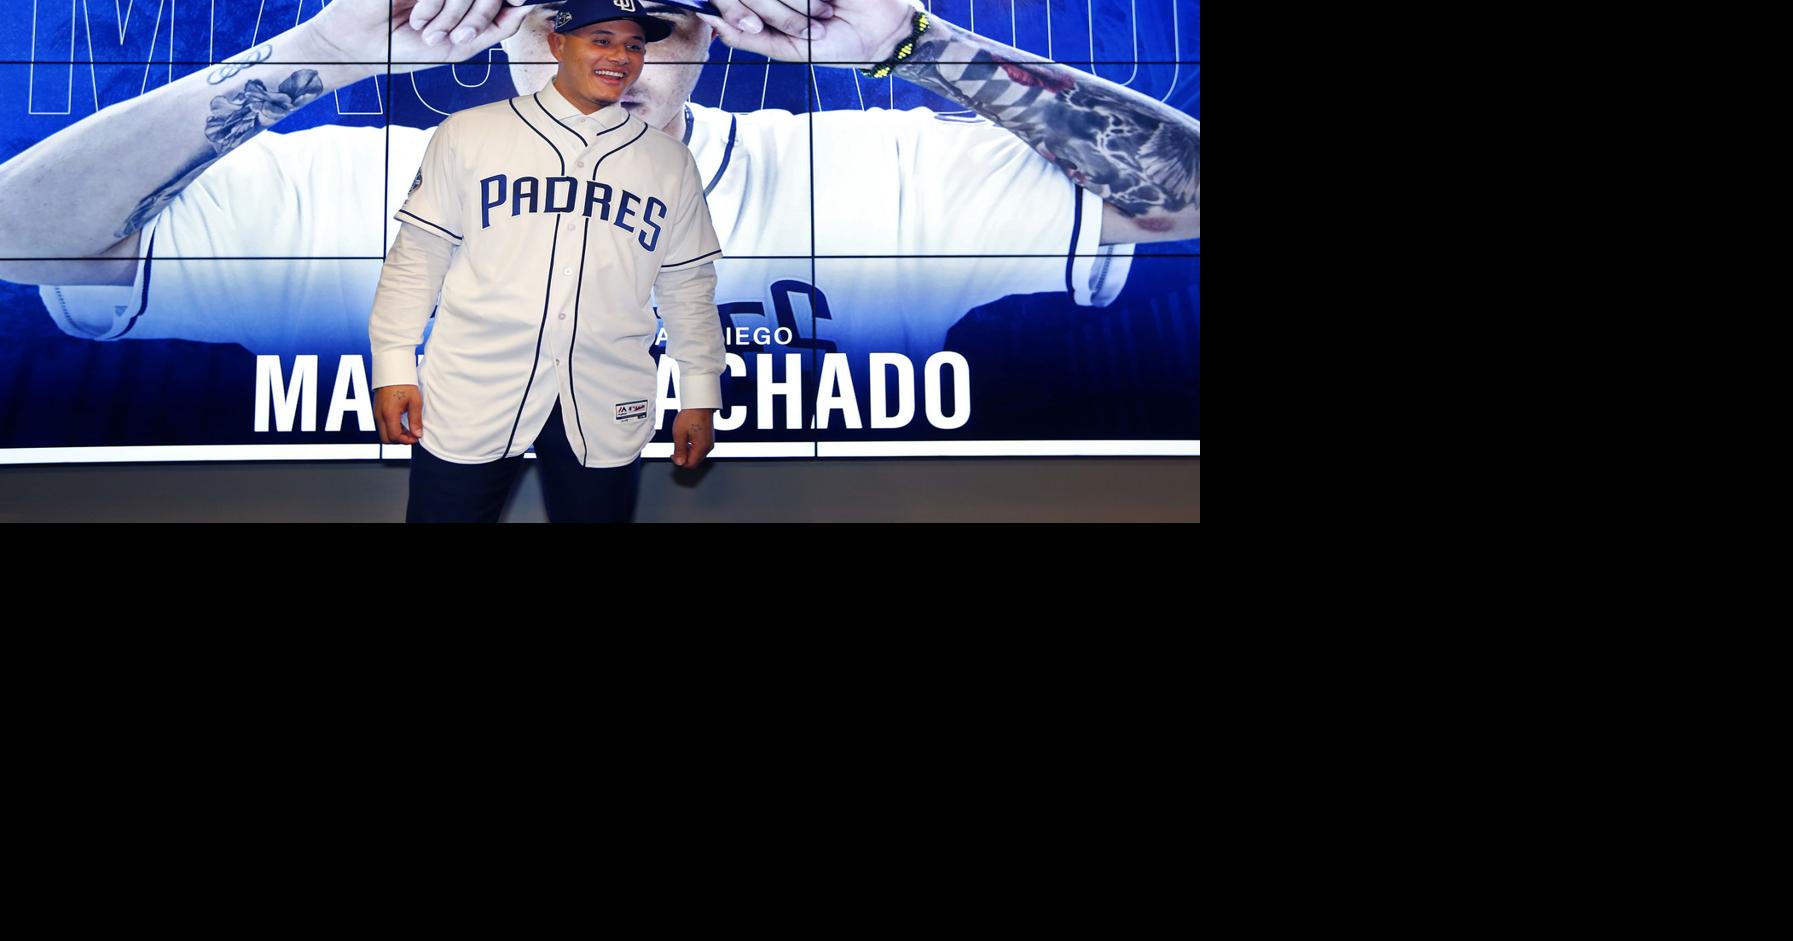 T-minus one month to Padres spring training - The San Diego Union-Tribune